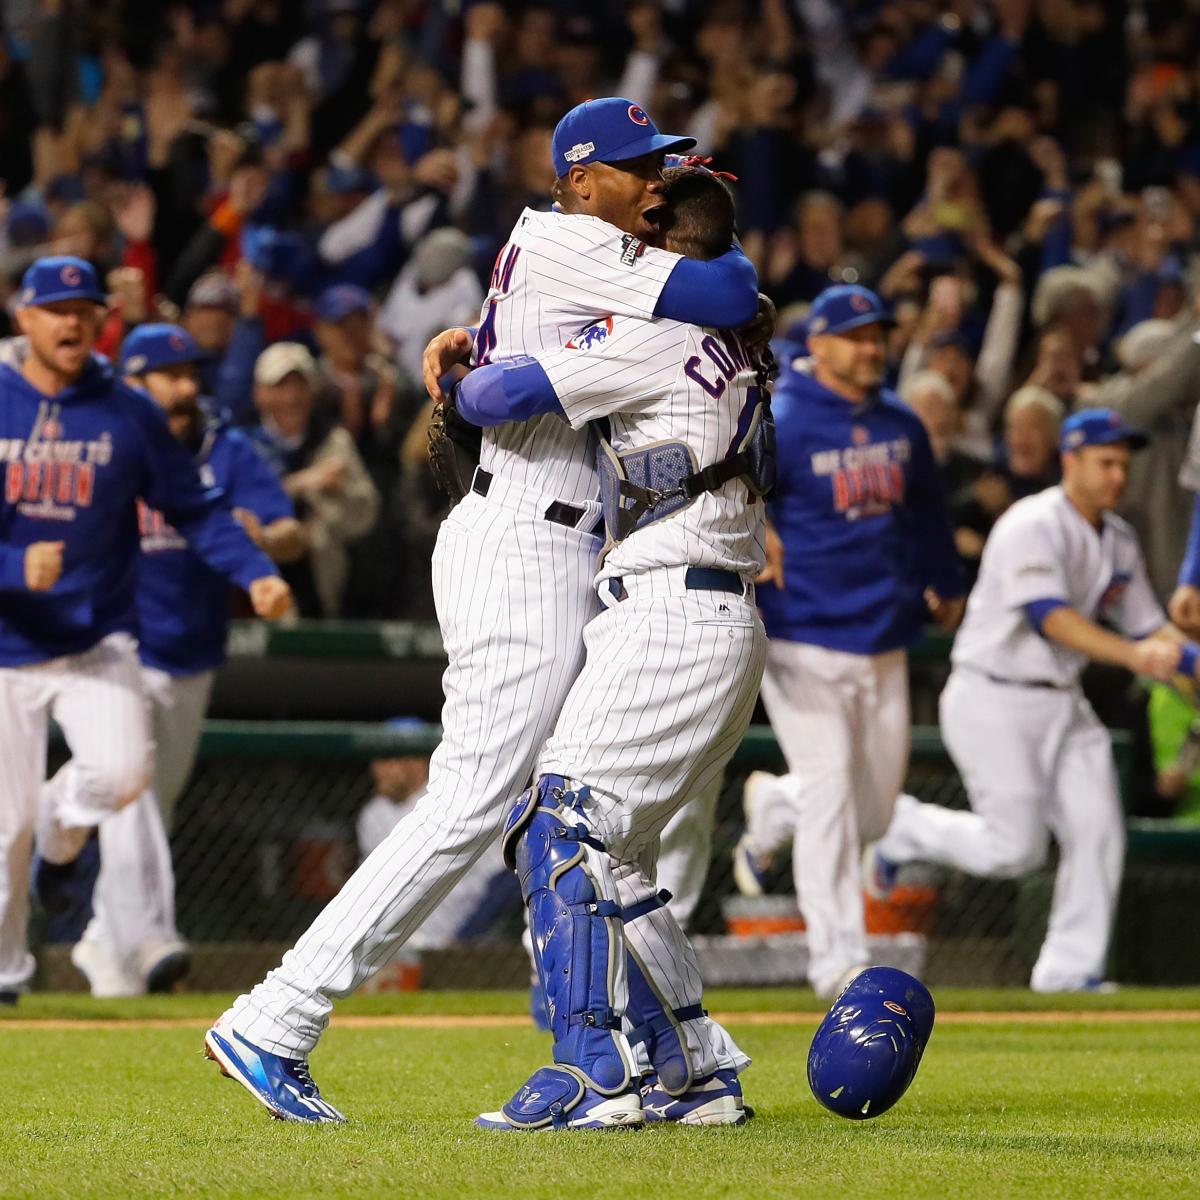 Cubs 'embrace the target' of expectations